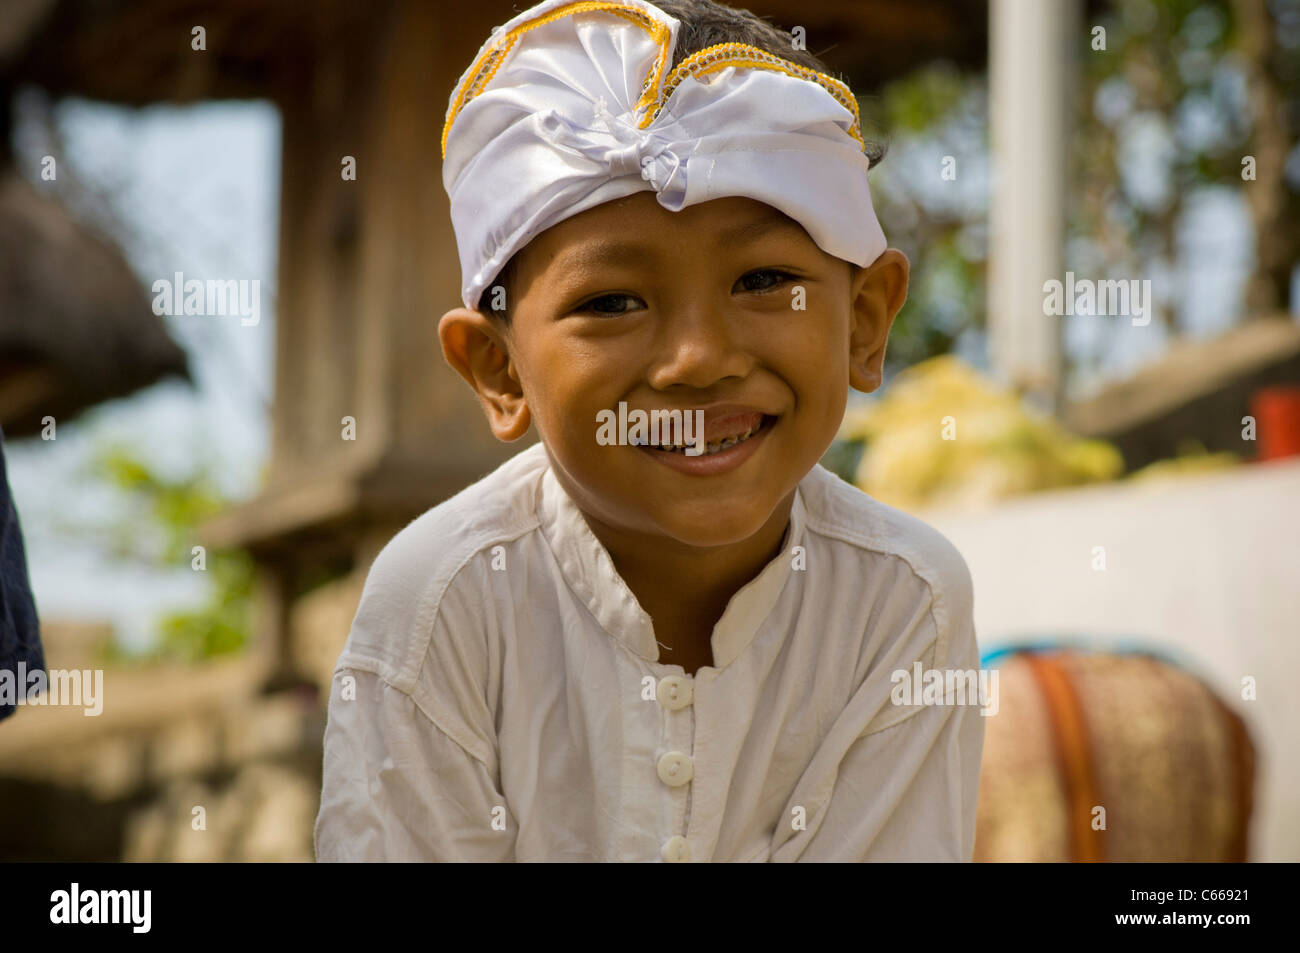 Smiling Balinese boy in traditional costume Stock Photo - Alamy